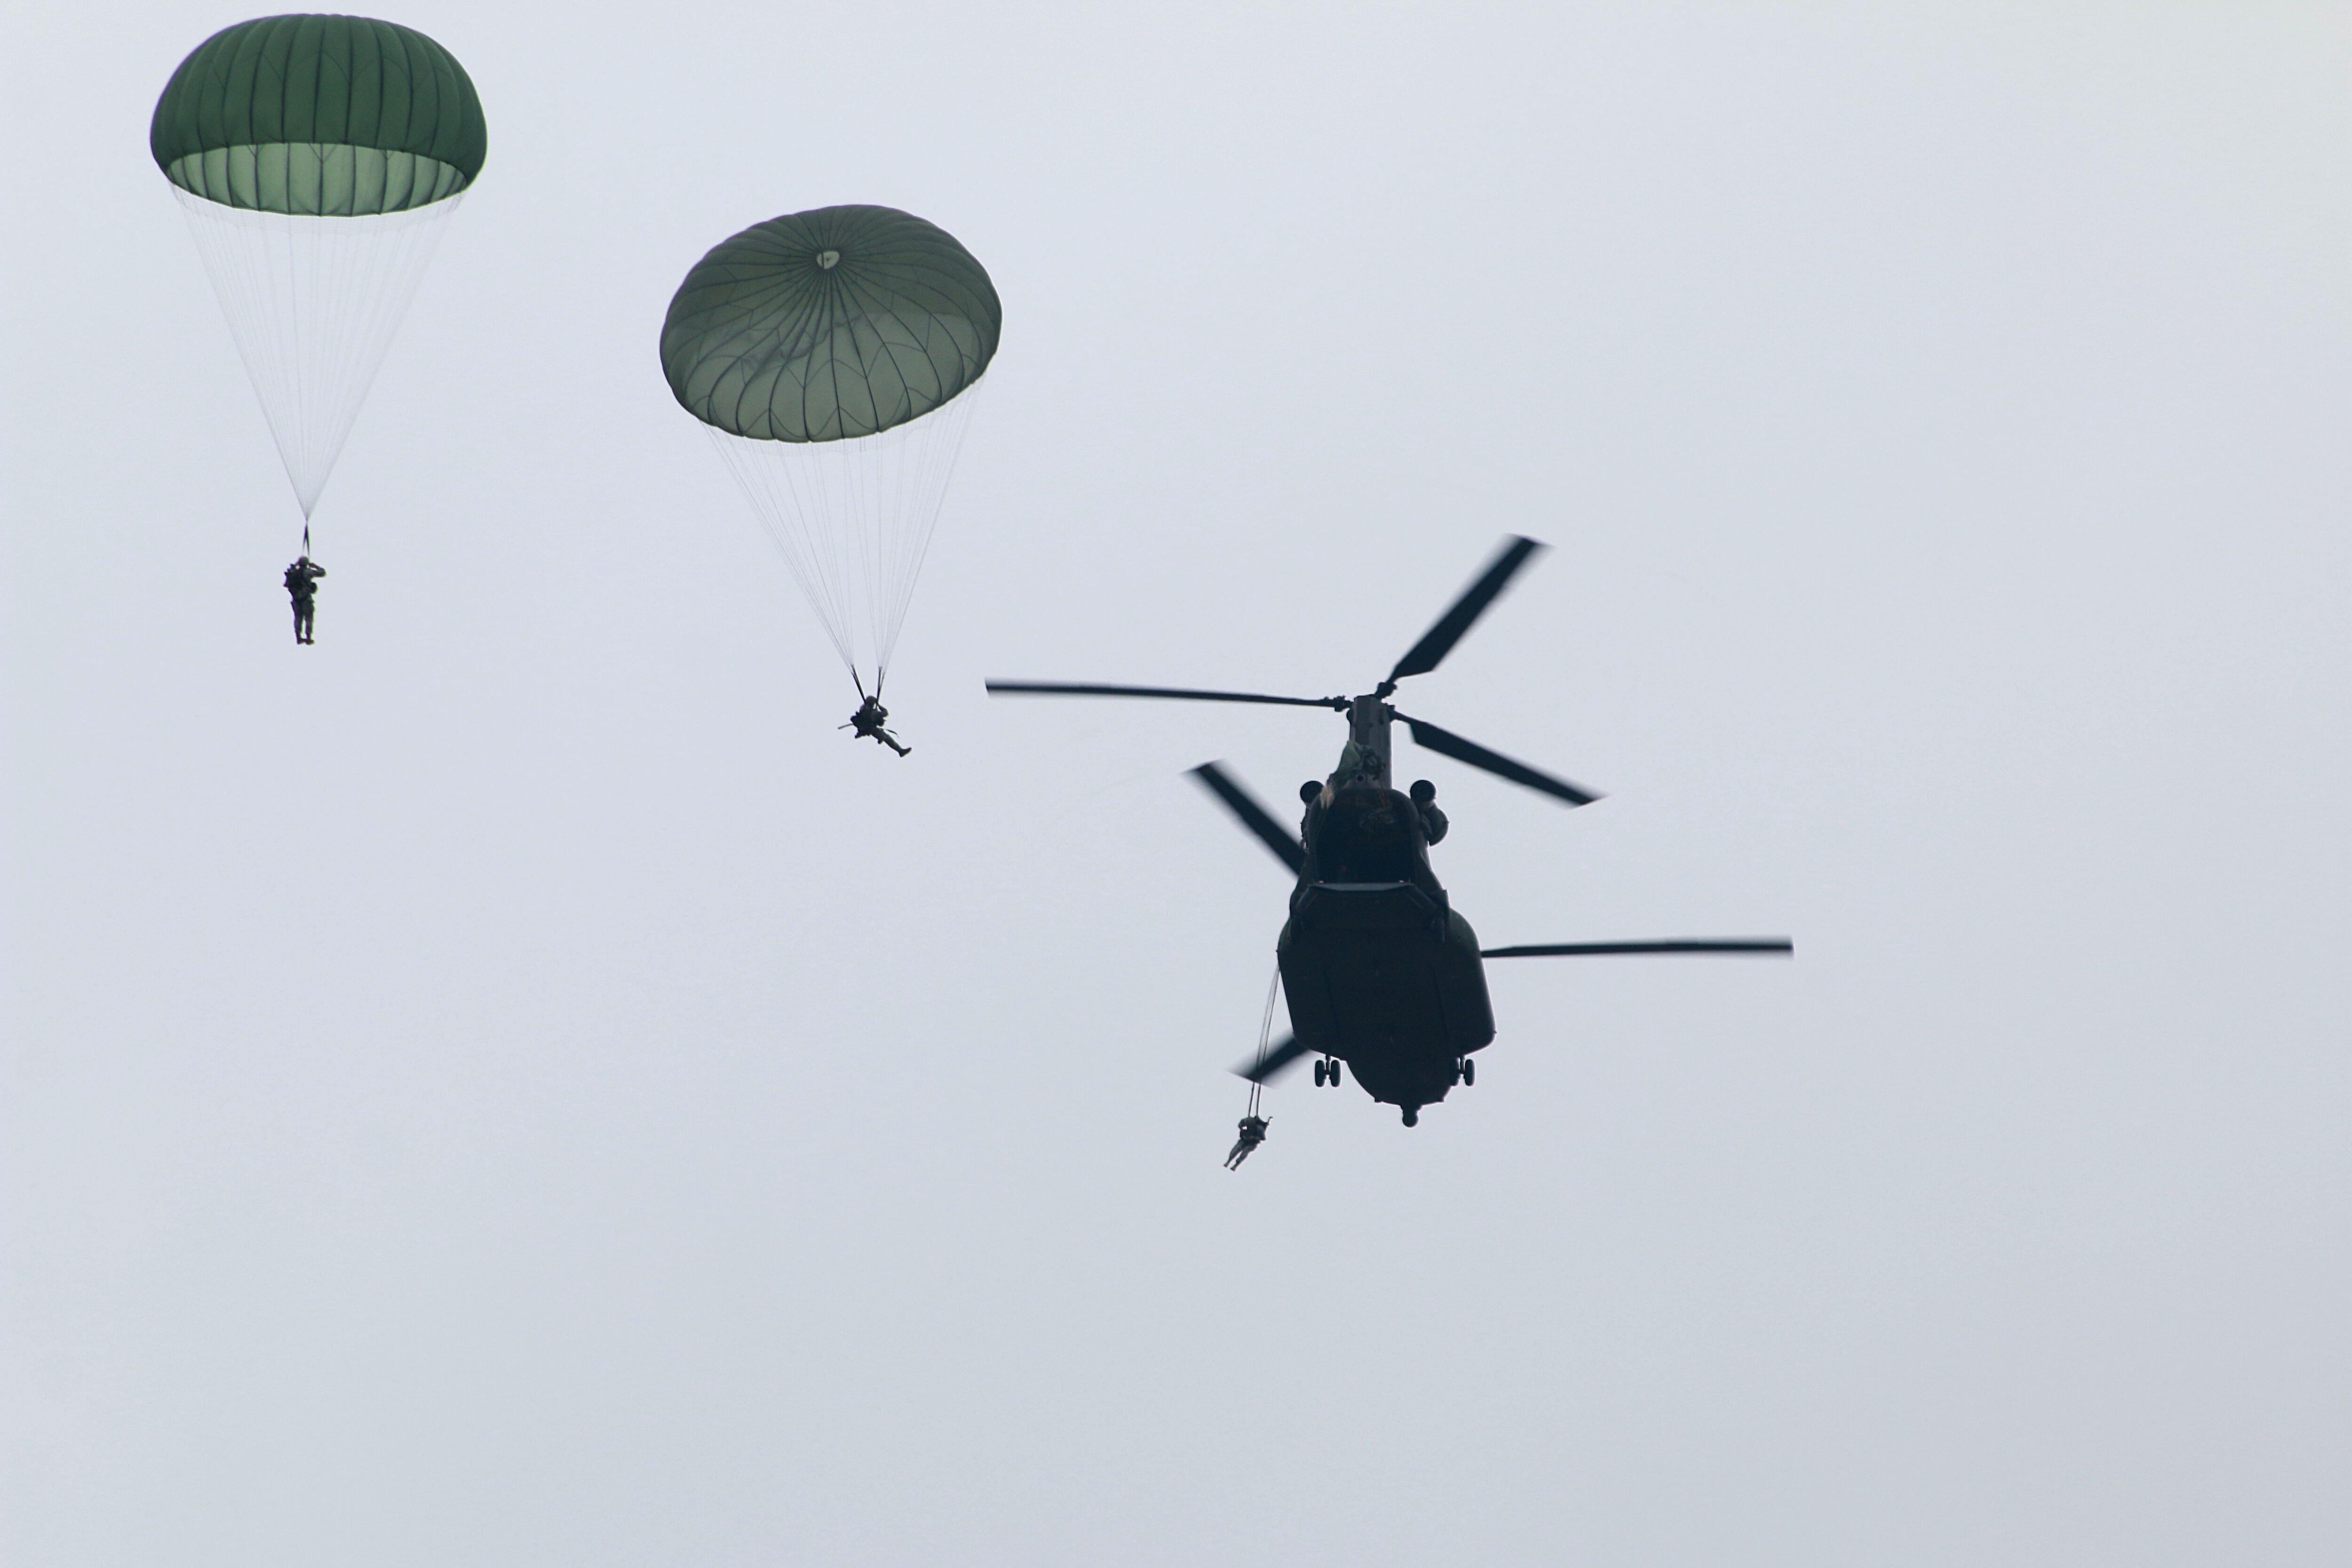 U.S. paratroopers utilizing T-11 parachutes conduct an airborne